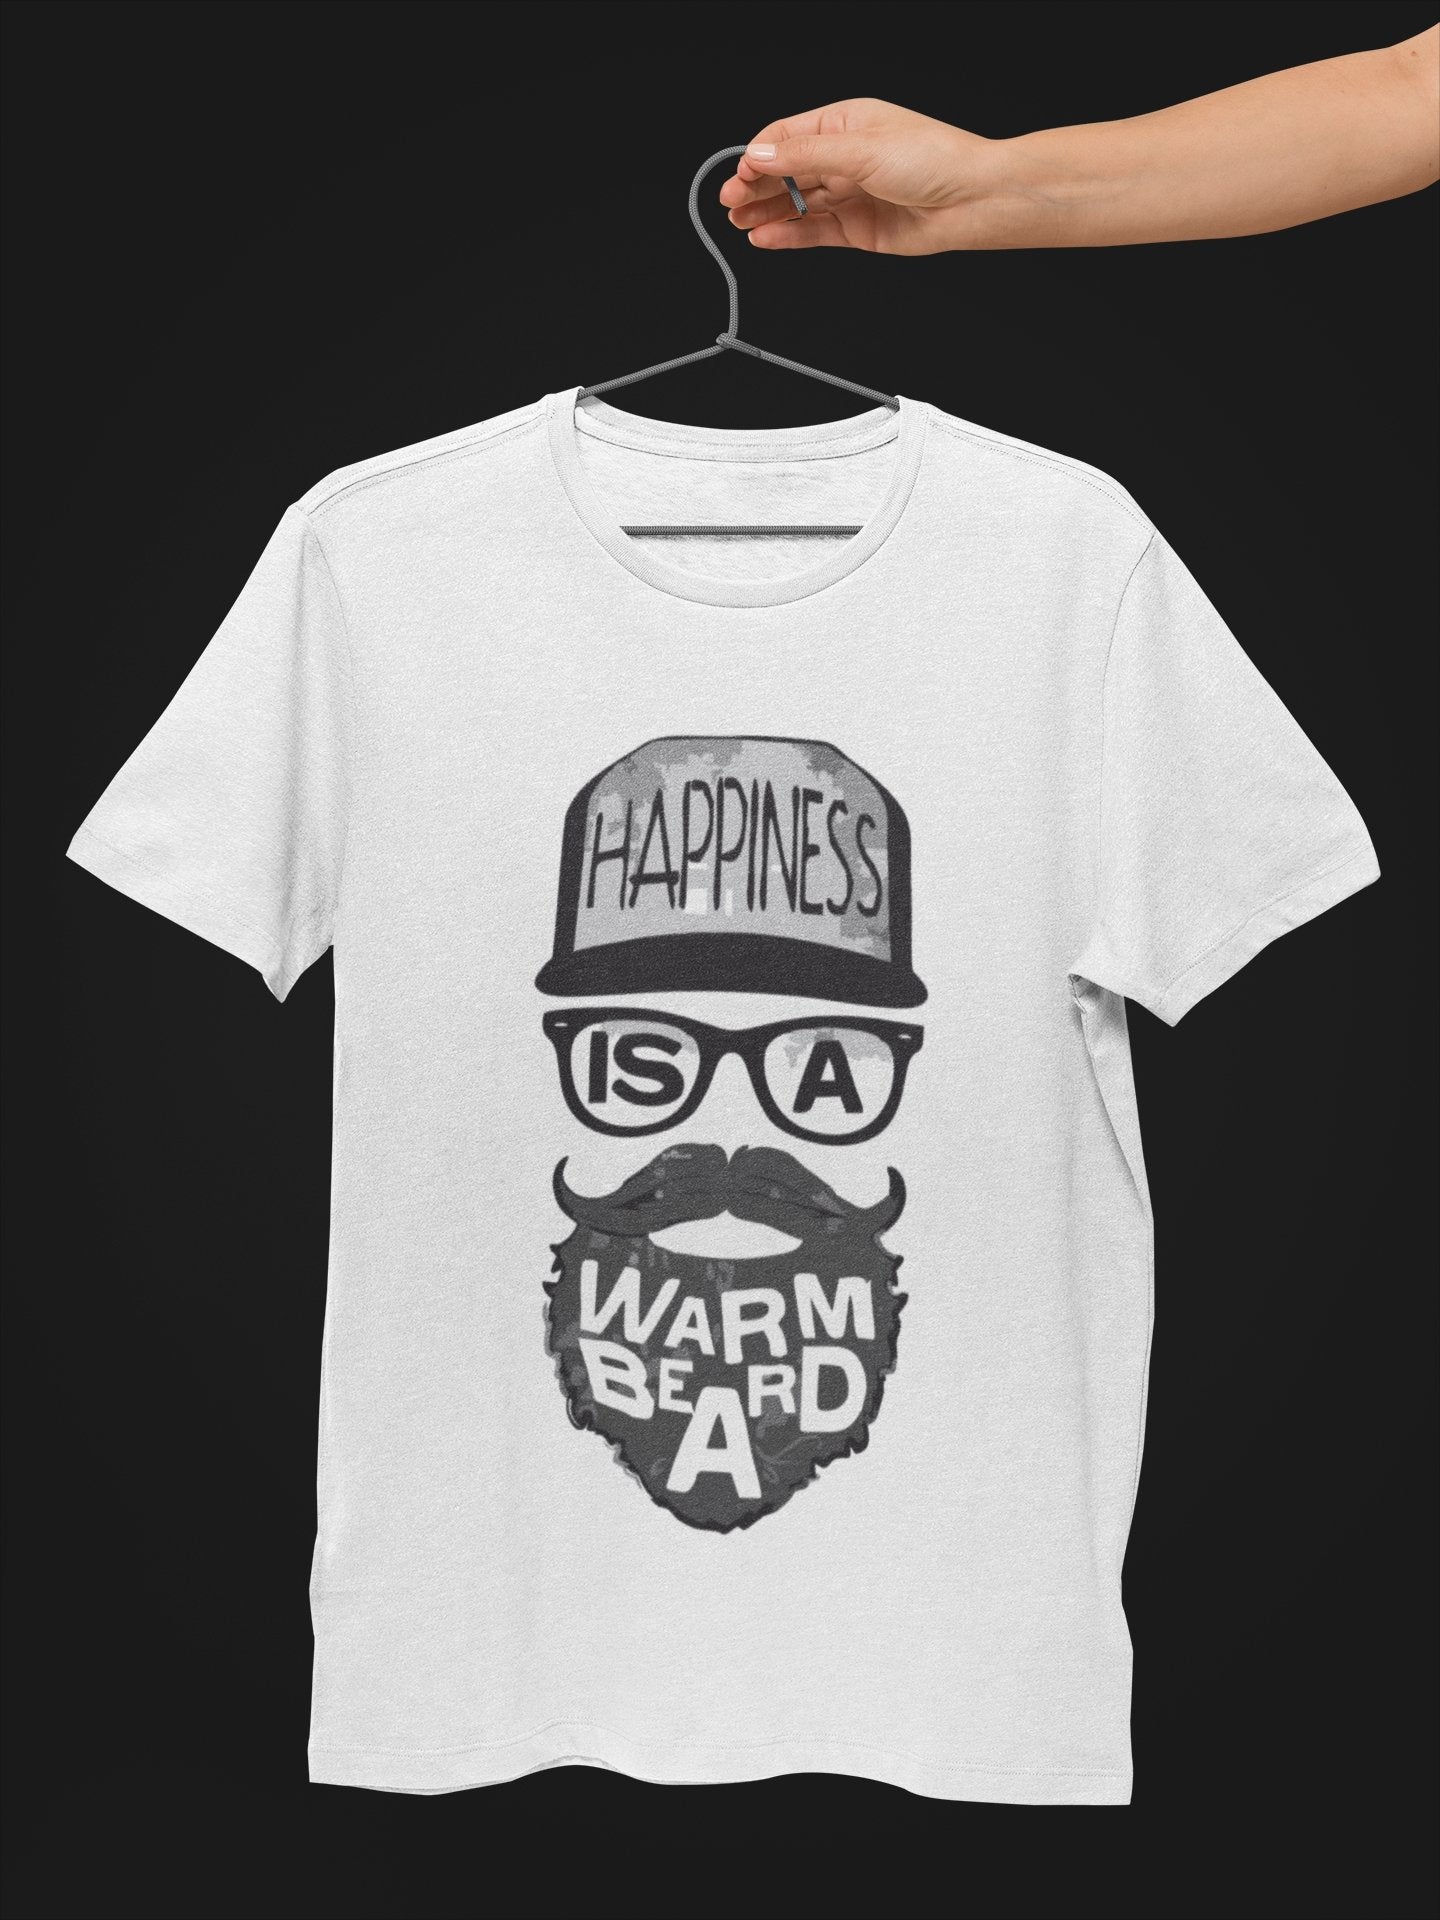 thelegalgang,Happiness is a Warm Beard T Shirt for Bearded Men,MEN.